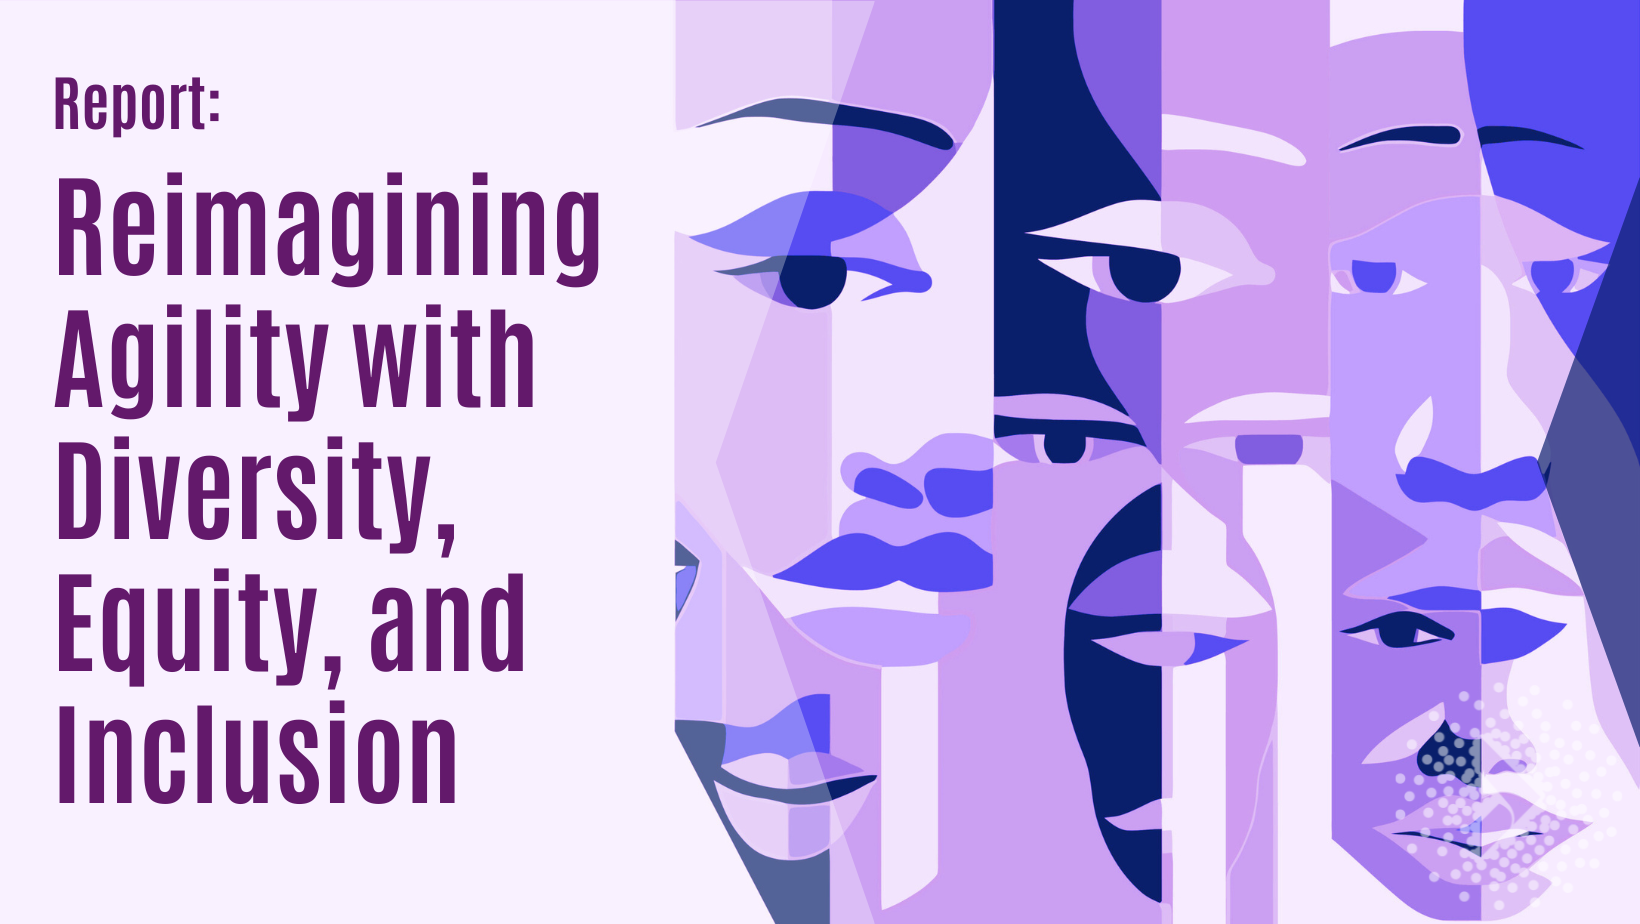 Reimagining Agility with Diversity, Equity, and Inclusion